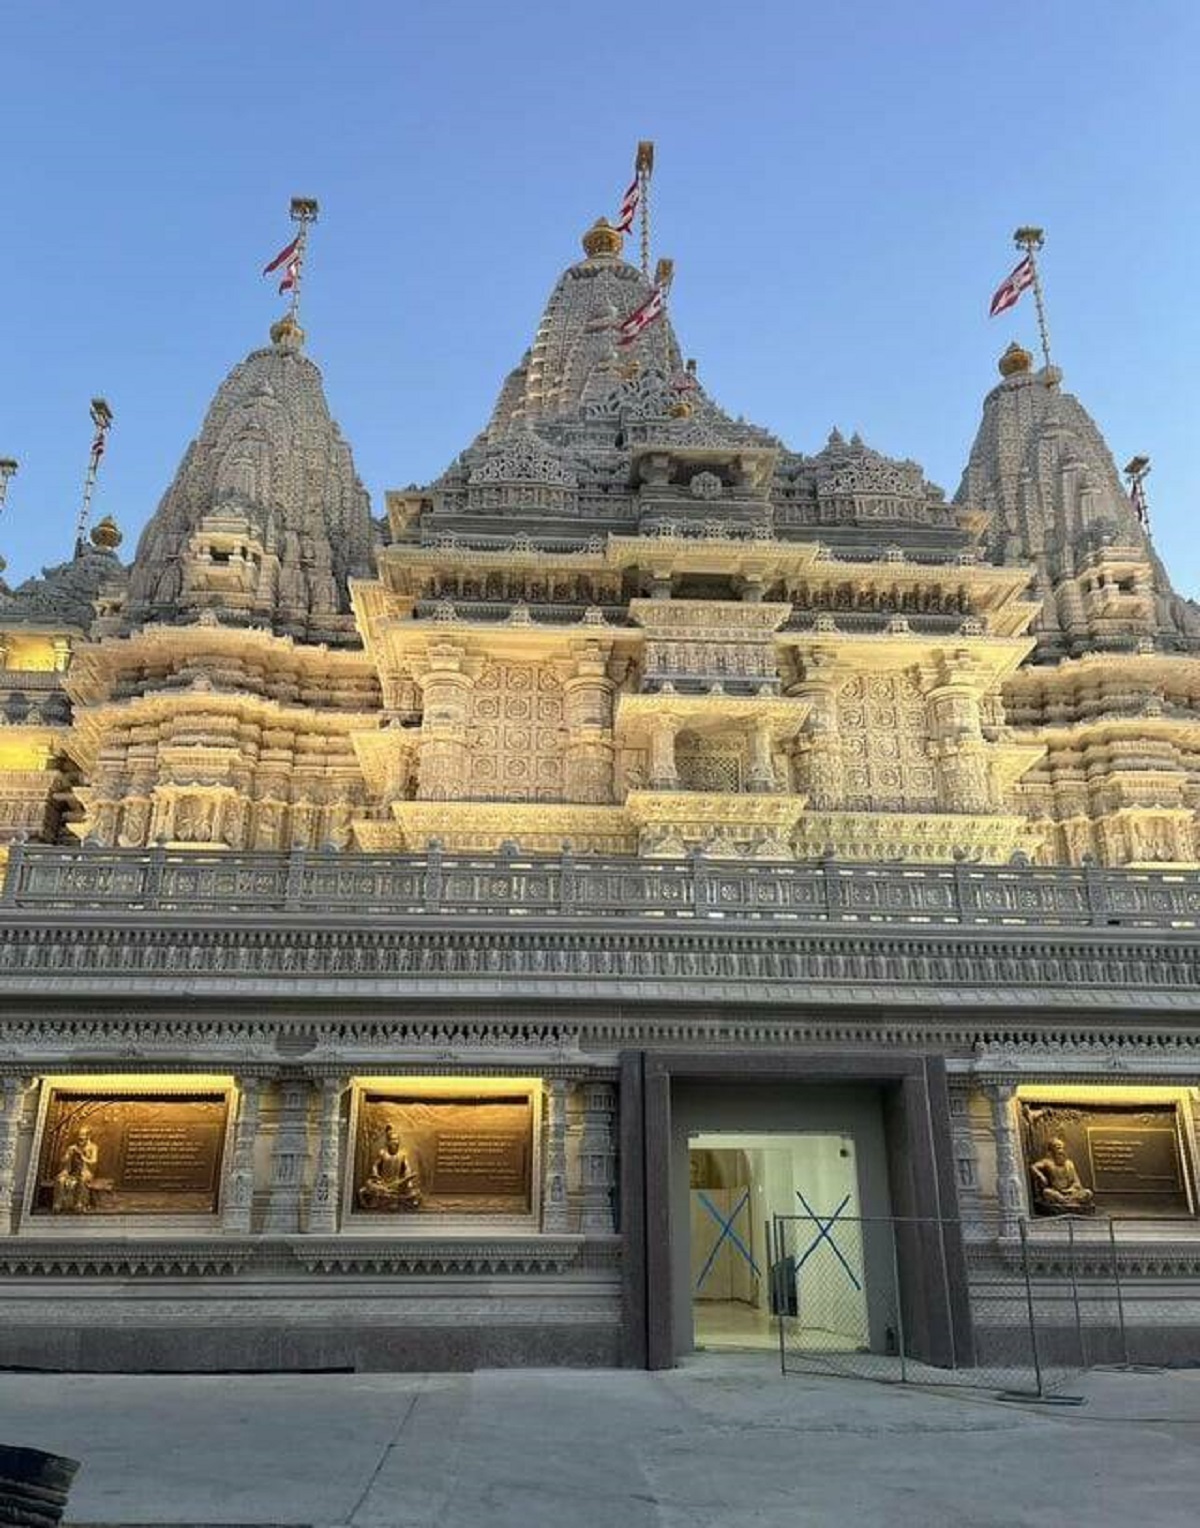 "The Largest Hindu Temple In The World Is Now In New Jersey."